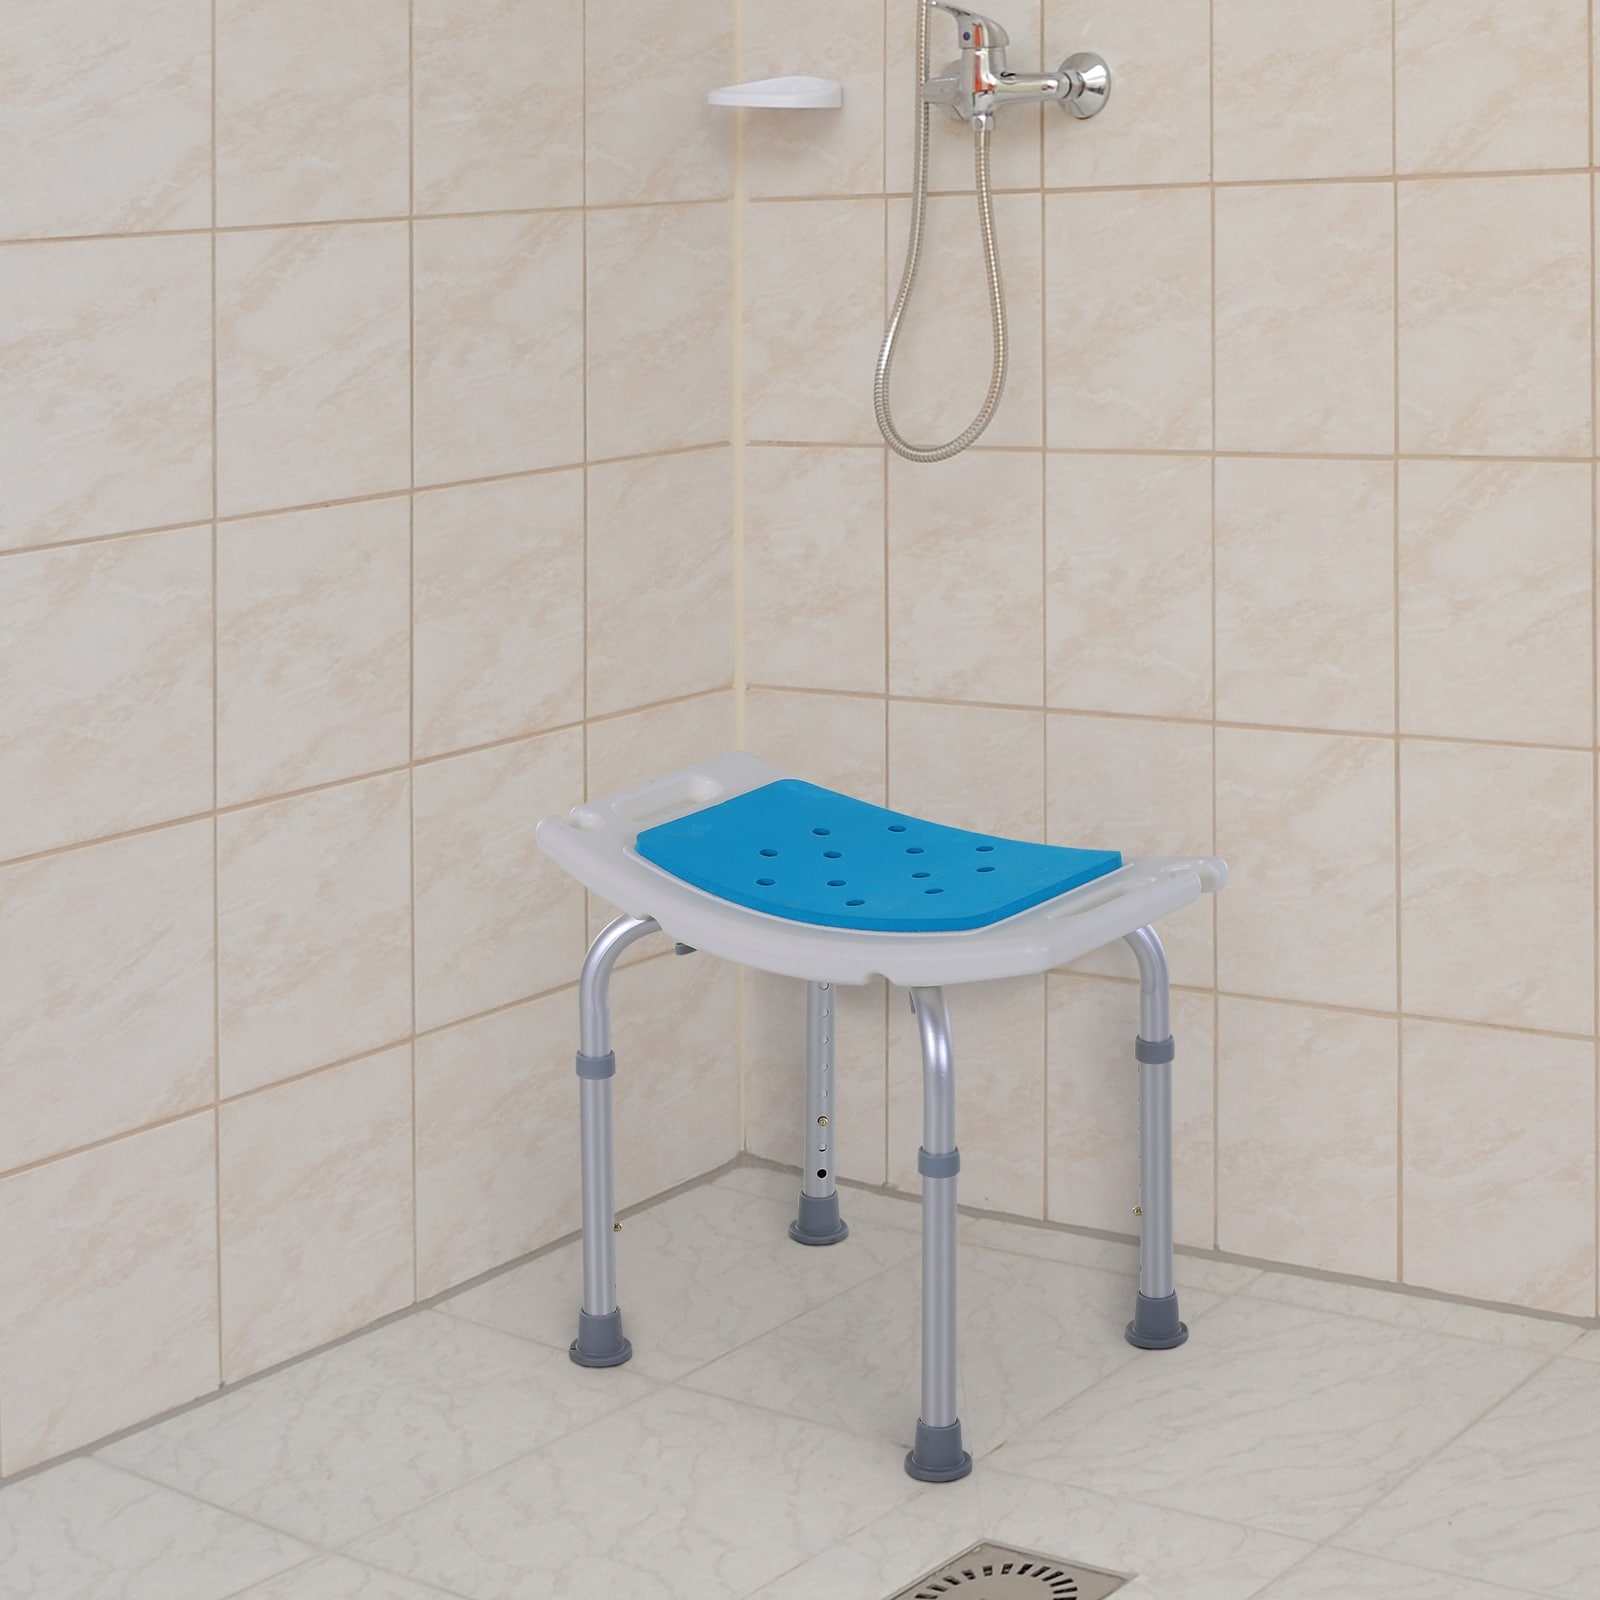 https://ak1.ostkcdn.com/images/products/is/images/direct/0a59e2f3f23516e529a72f548a1fb6f7a3de4ff0/Homcom-6-Level-Adjustable-Curved-Bath-Stool-Spa-Shower-Chair-Non-Slip-Design-for-the-Elderly%2C-Injured%2C-%26-Pregnant-Women.jpg